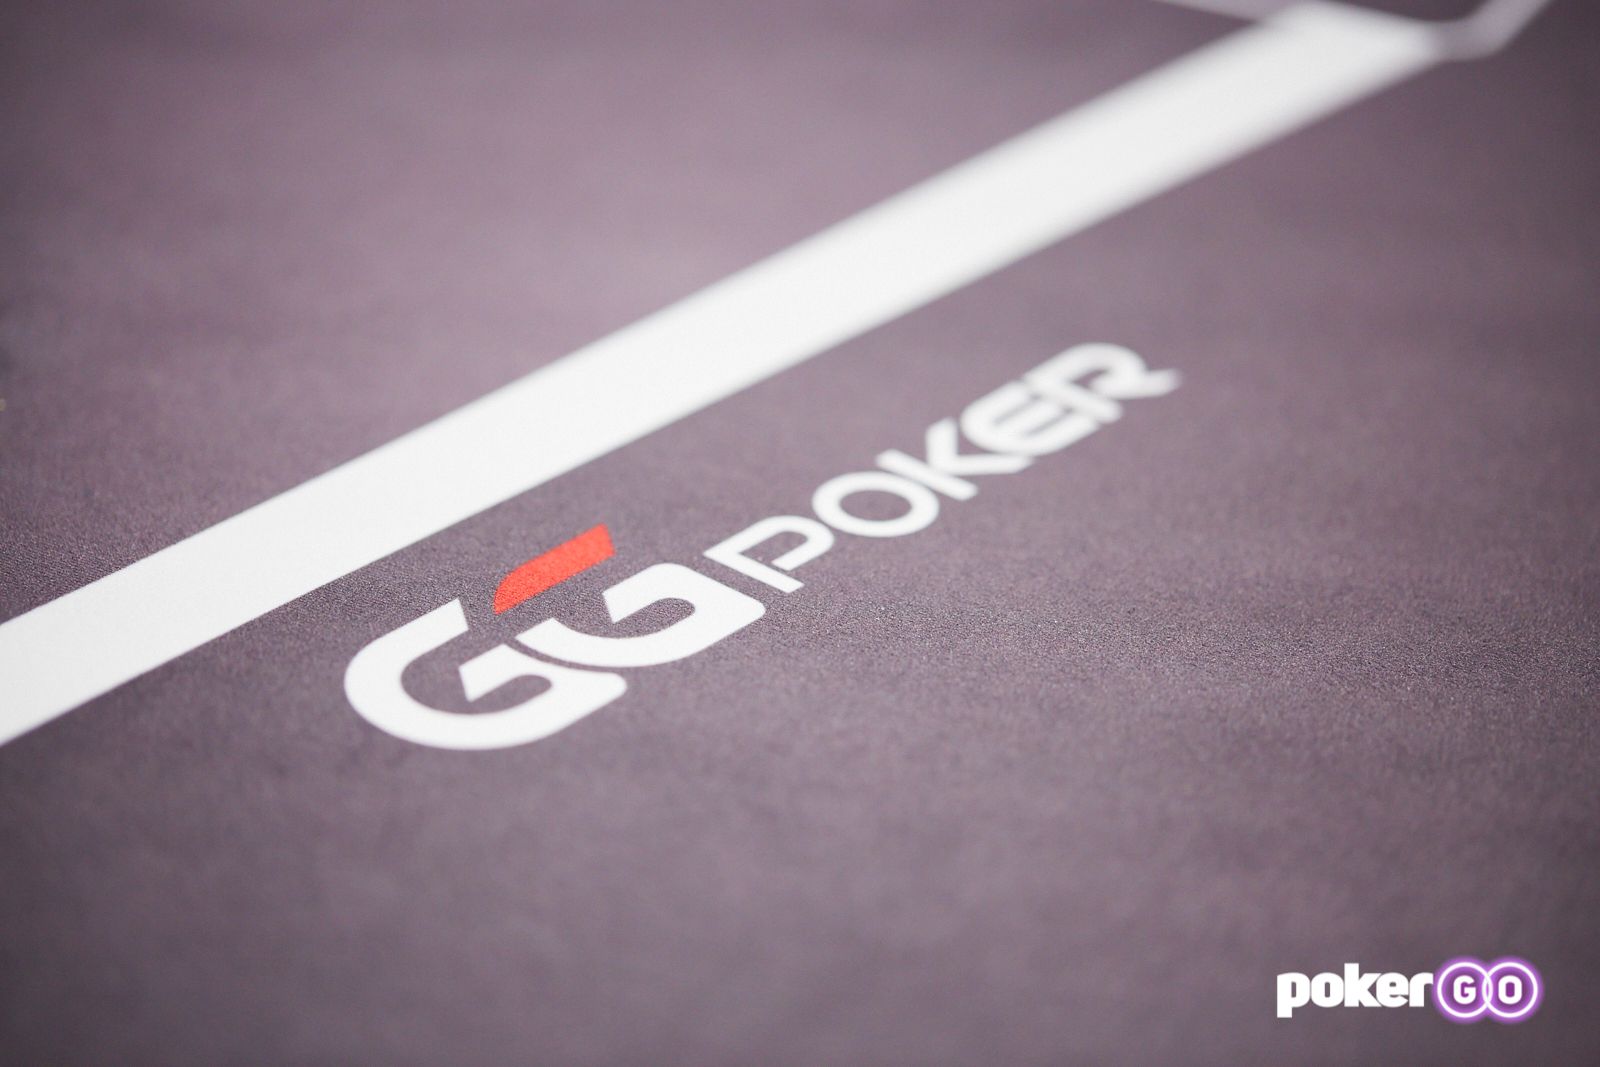 GGPoker is Now Larger Than All Other Major Dot-Com Operators Combined